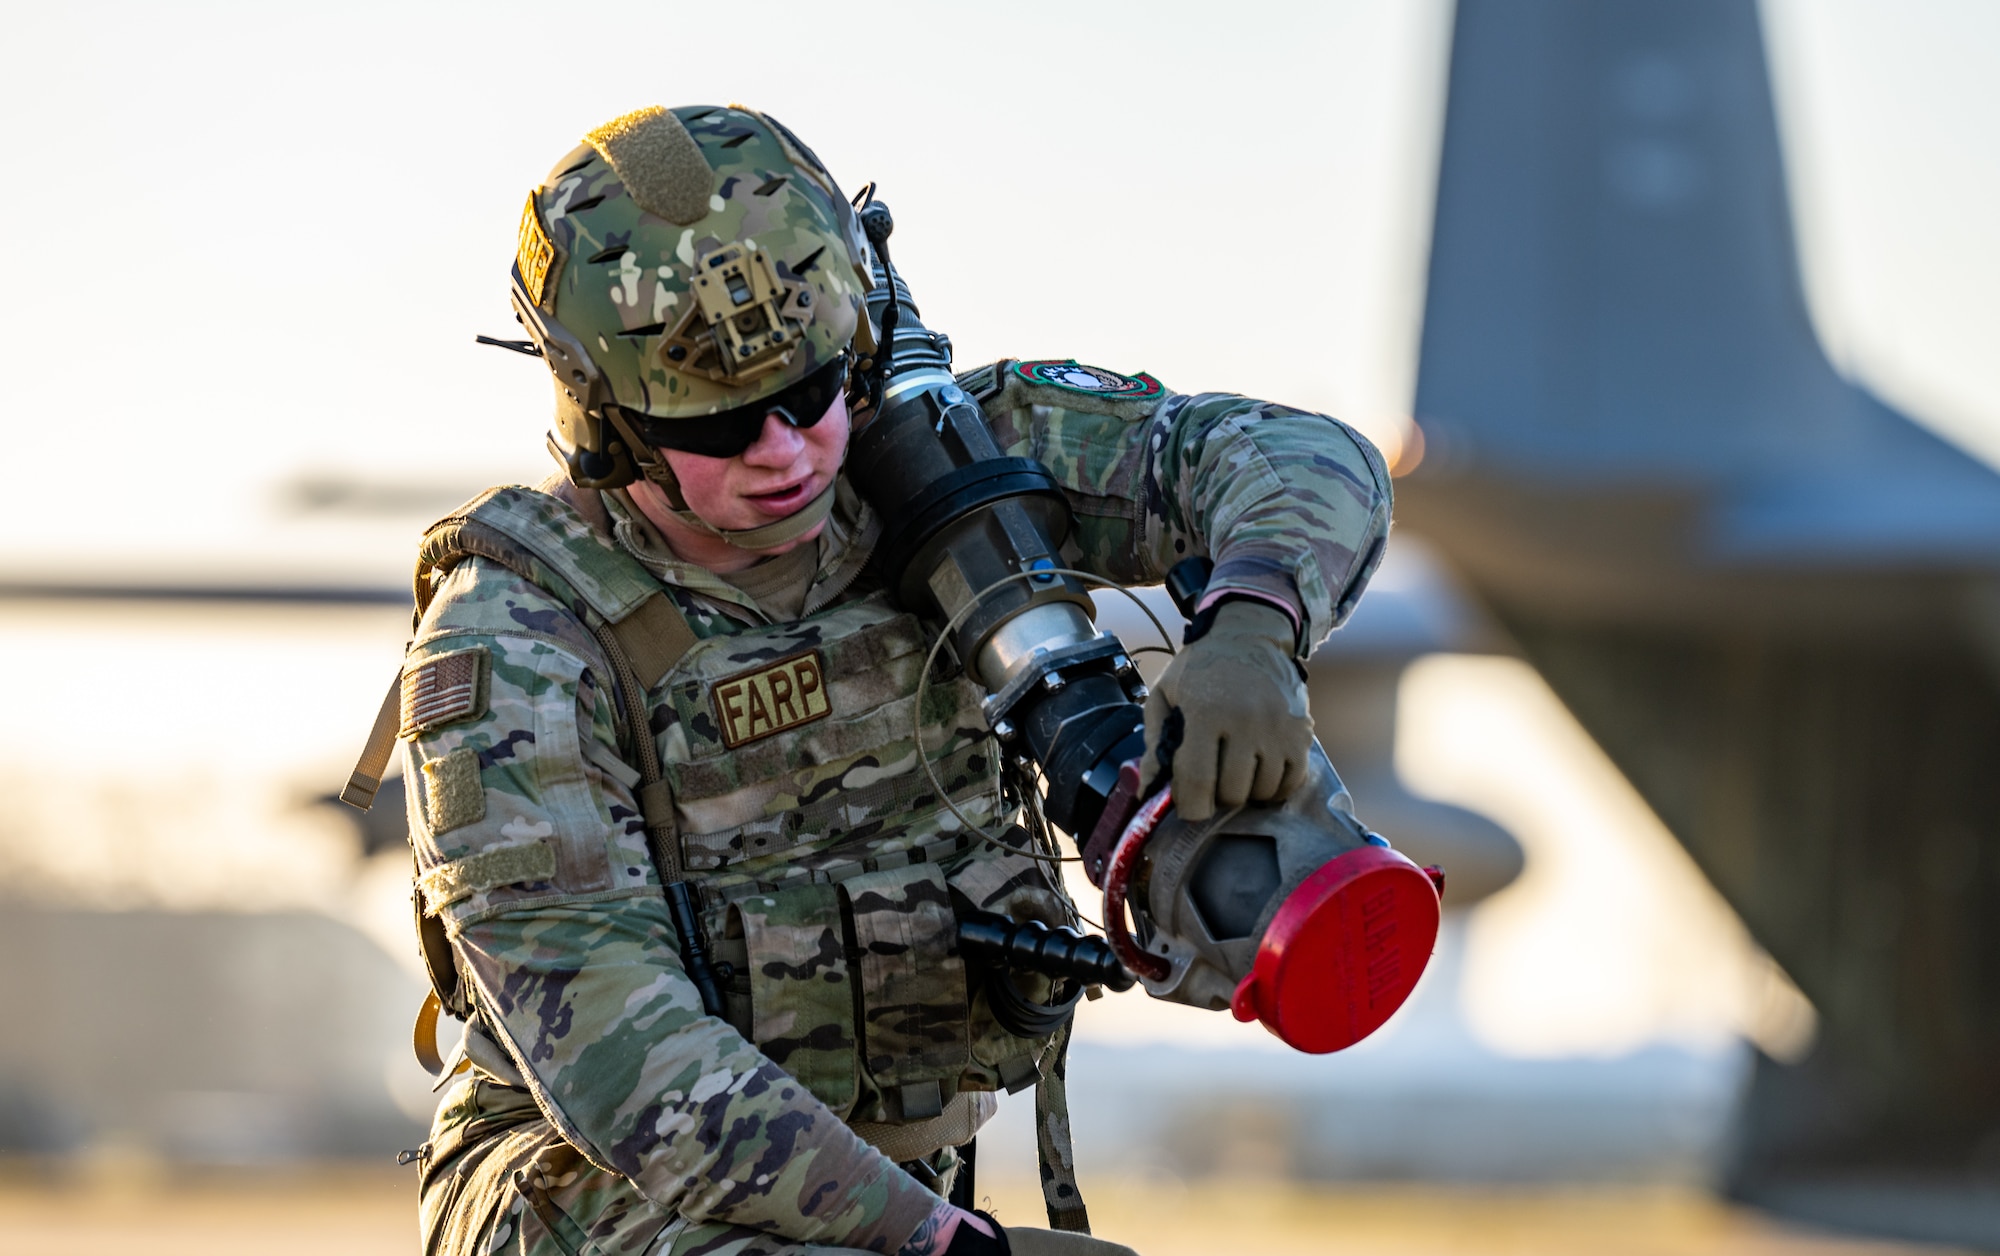 U.S. Air Force Senior Airman Benjamin Kramer, 100th Logistics Readiness Squadron forward area refueling point (FARP) specialist assigned to the 100th Air Refueling Wing, carries a fuel hose away from an MC-130J Commando II aircraft assigned to the 352nd Special Operations Wing during FARP training at Royal Air Force Mildenhall, England, Feb. 6, 2023. FARP capabilities are just one example of the agile combat employment concepts that are being trained and developed as the 352nd SOW and 100th ARW continue to lead the way in building readiness. (U.S. Air Force photo by Staff Sgt. Kevin Long)